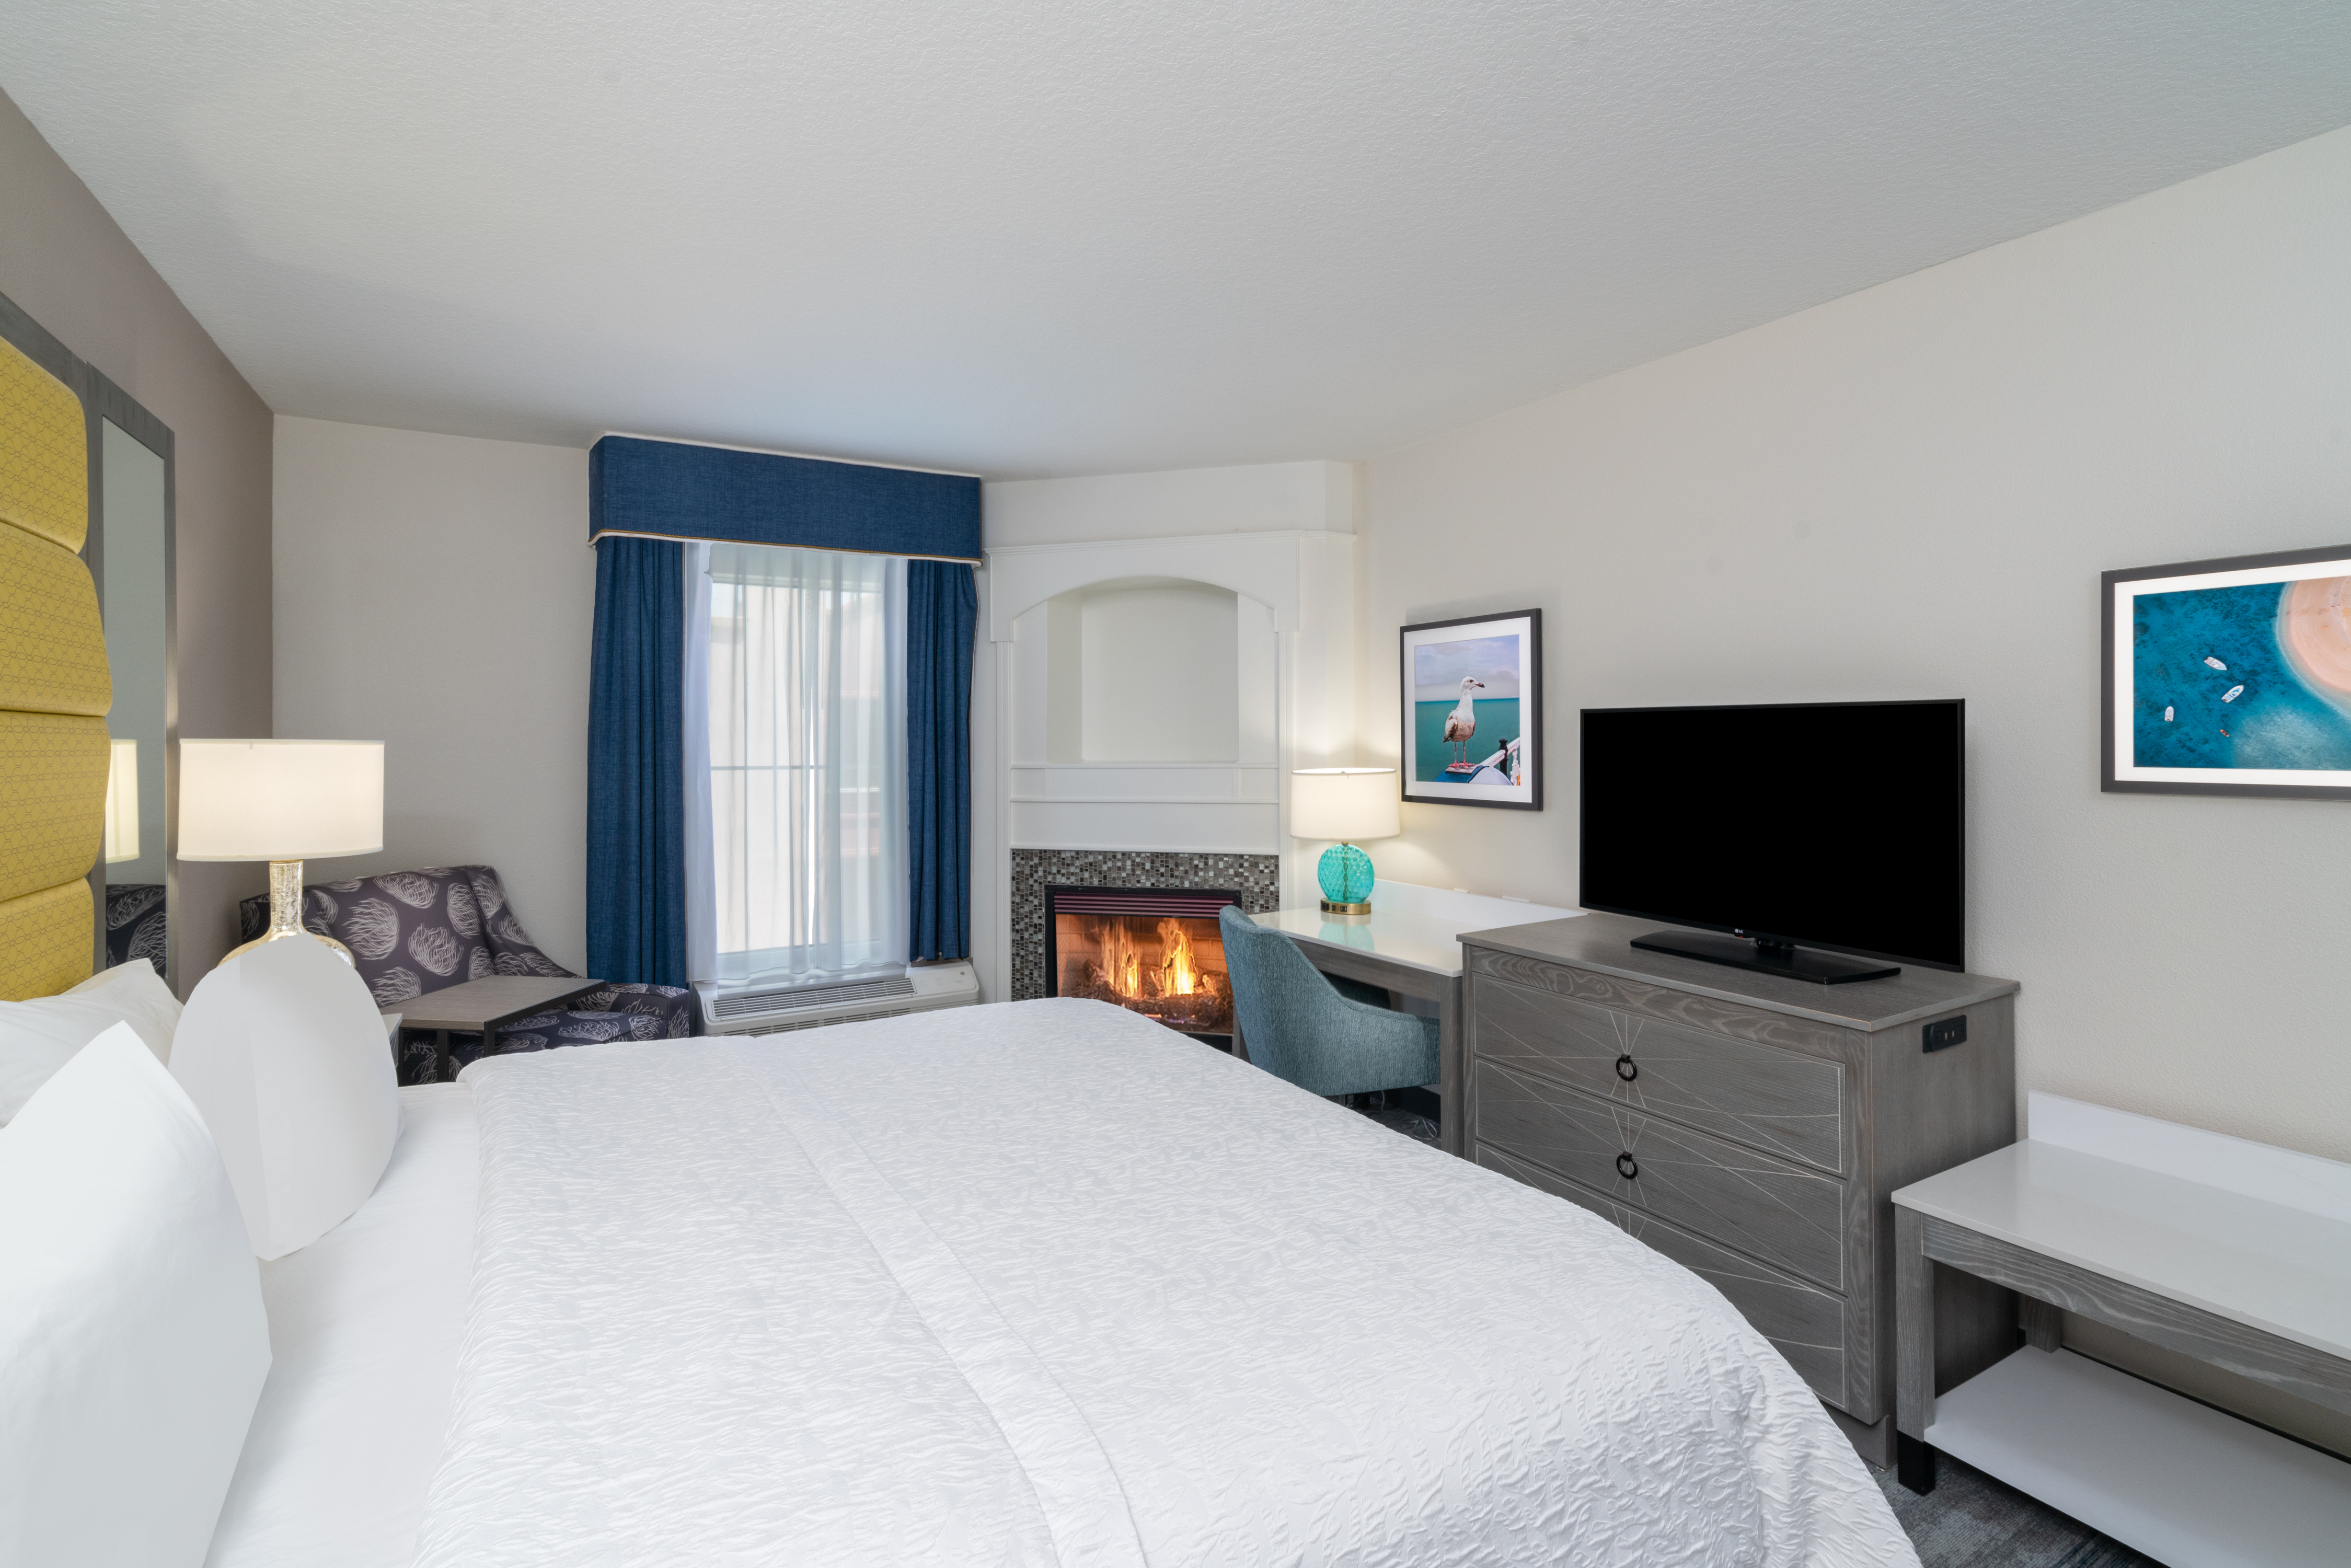 Guest Room with Large Bed Fireplace Armchair Desk and HDTV